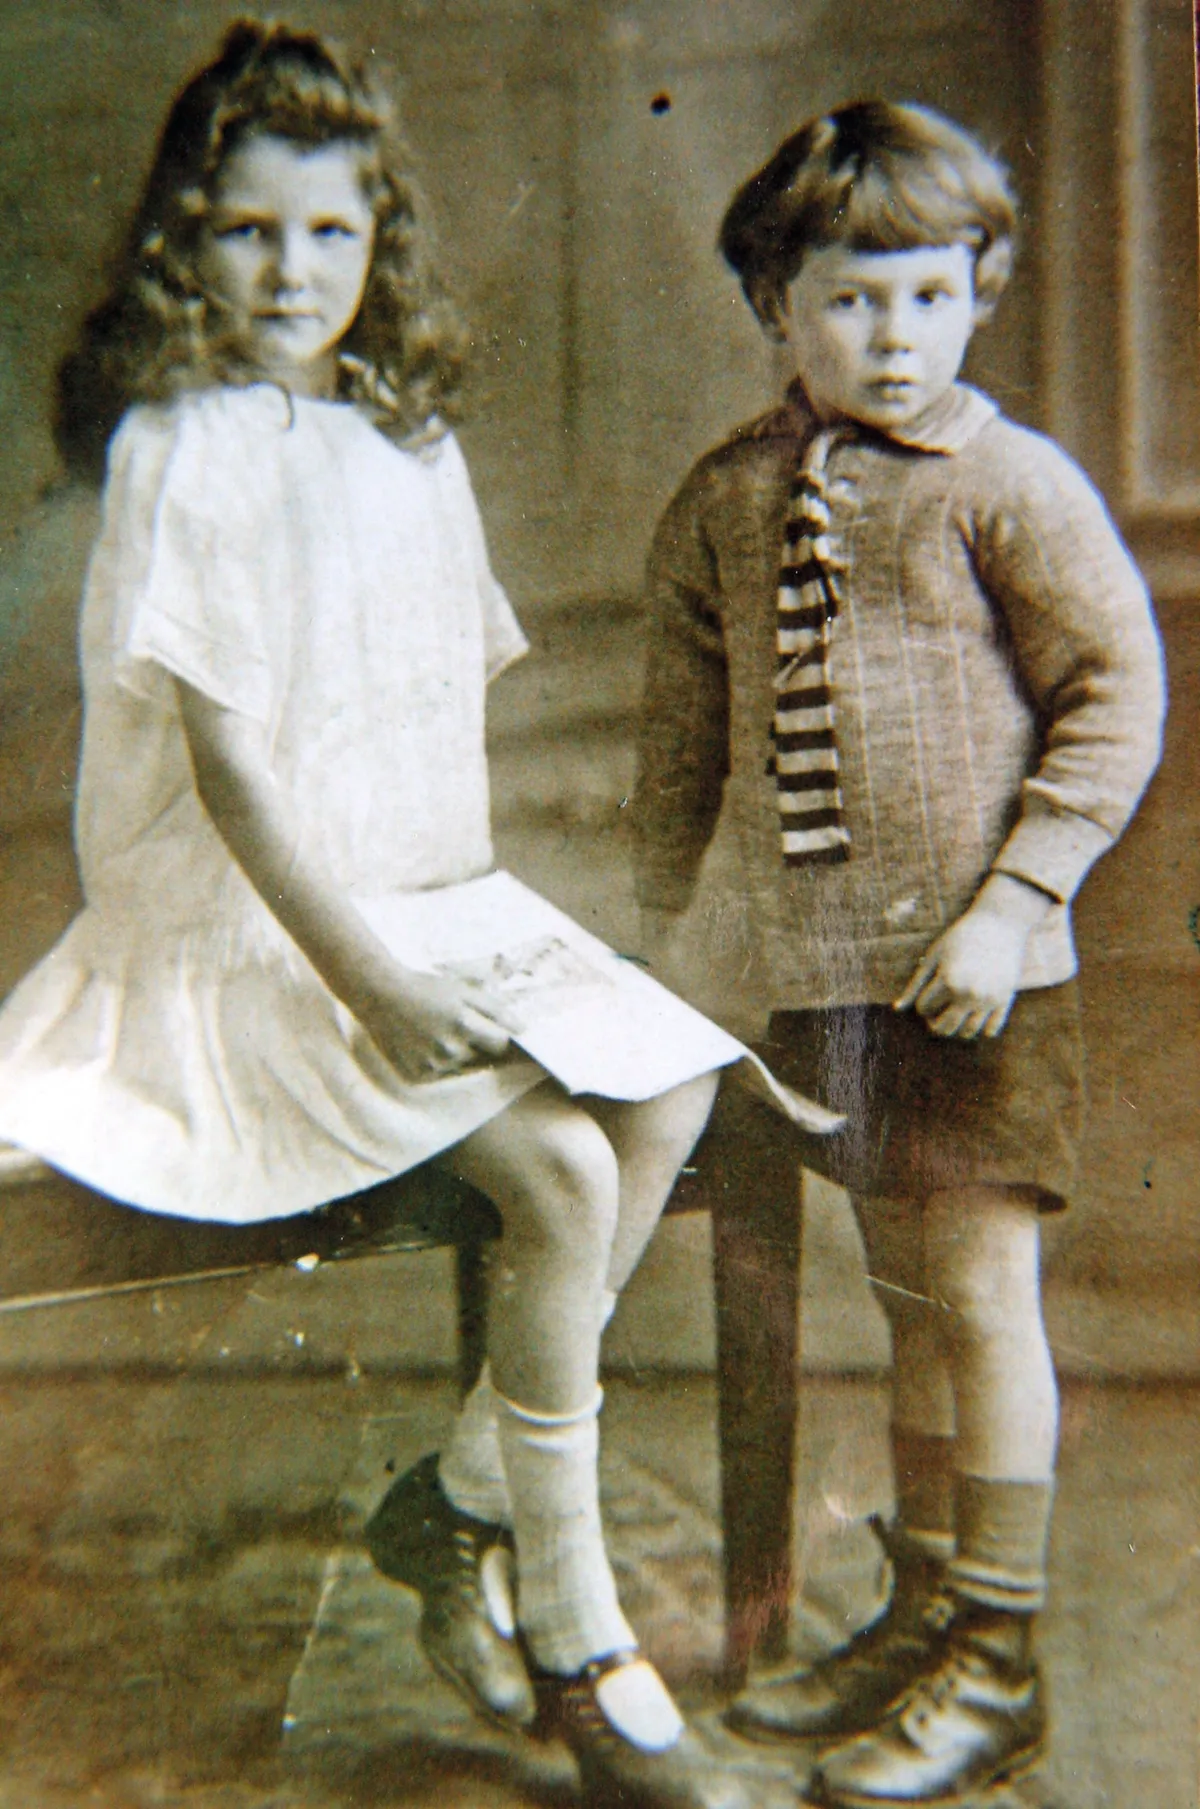 A black and white photograph of a young boy and girl in old-fashioned clothes